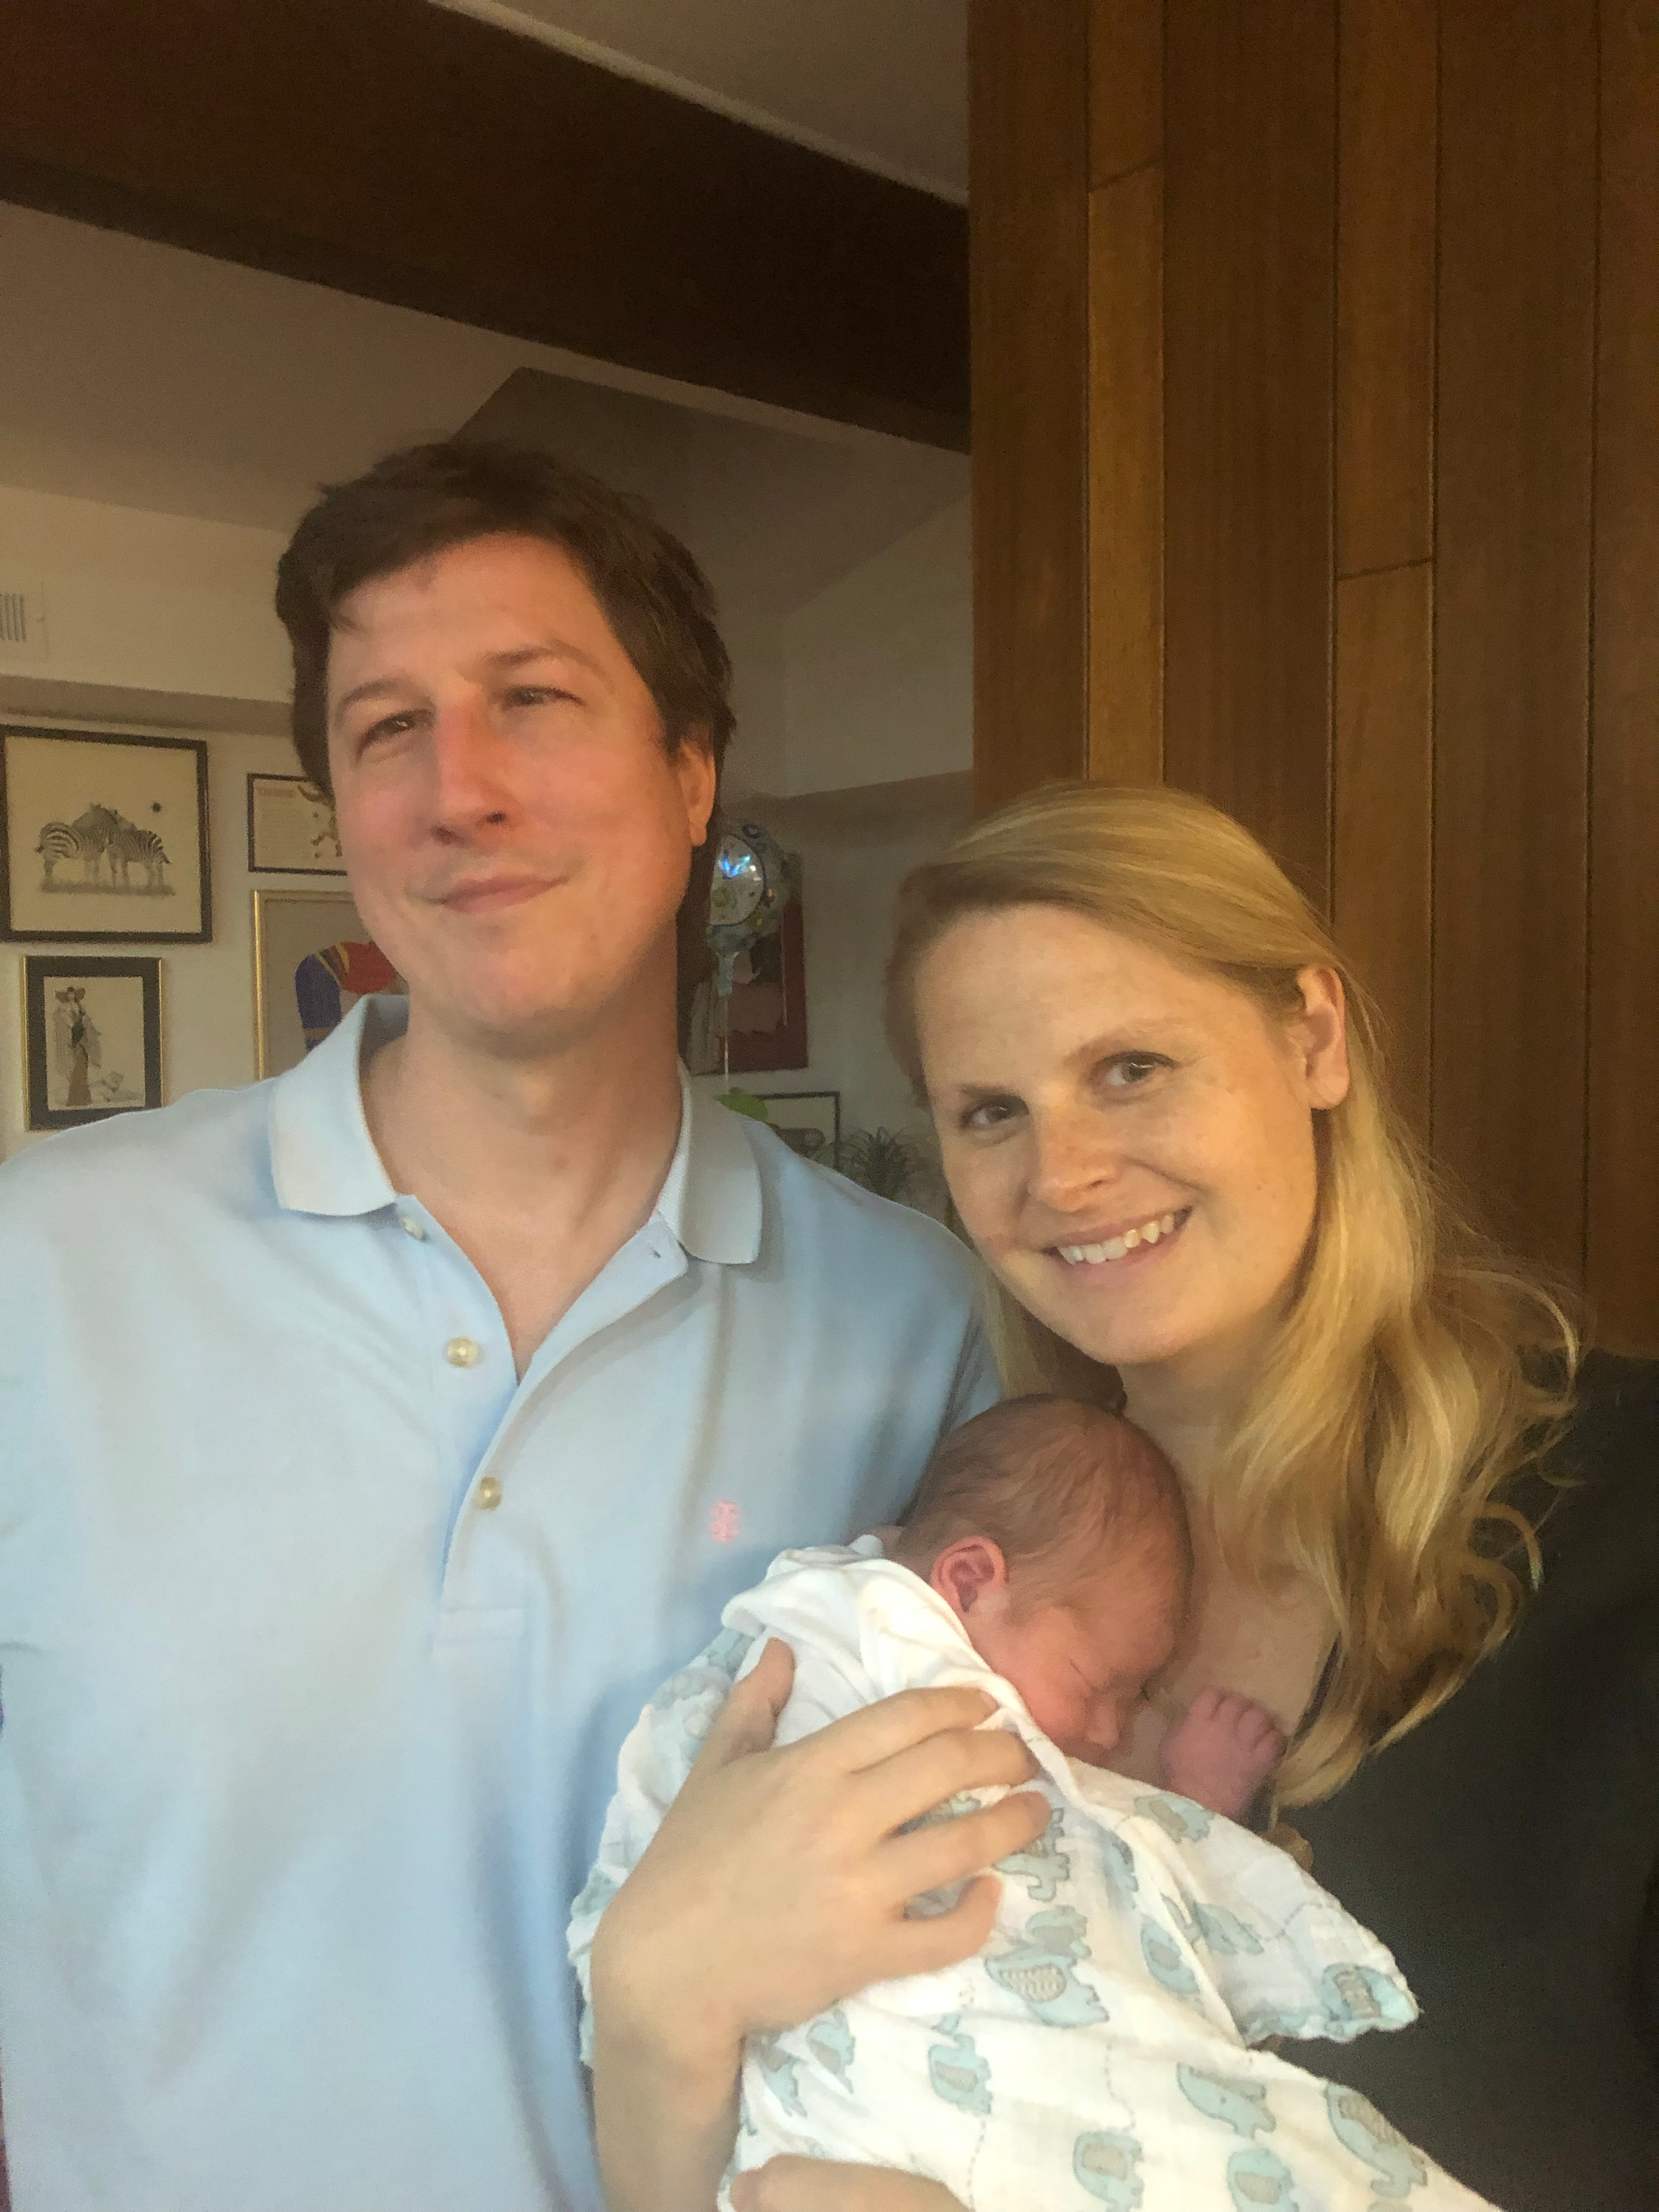 Eve Wicker and her husband with their new son.